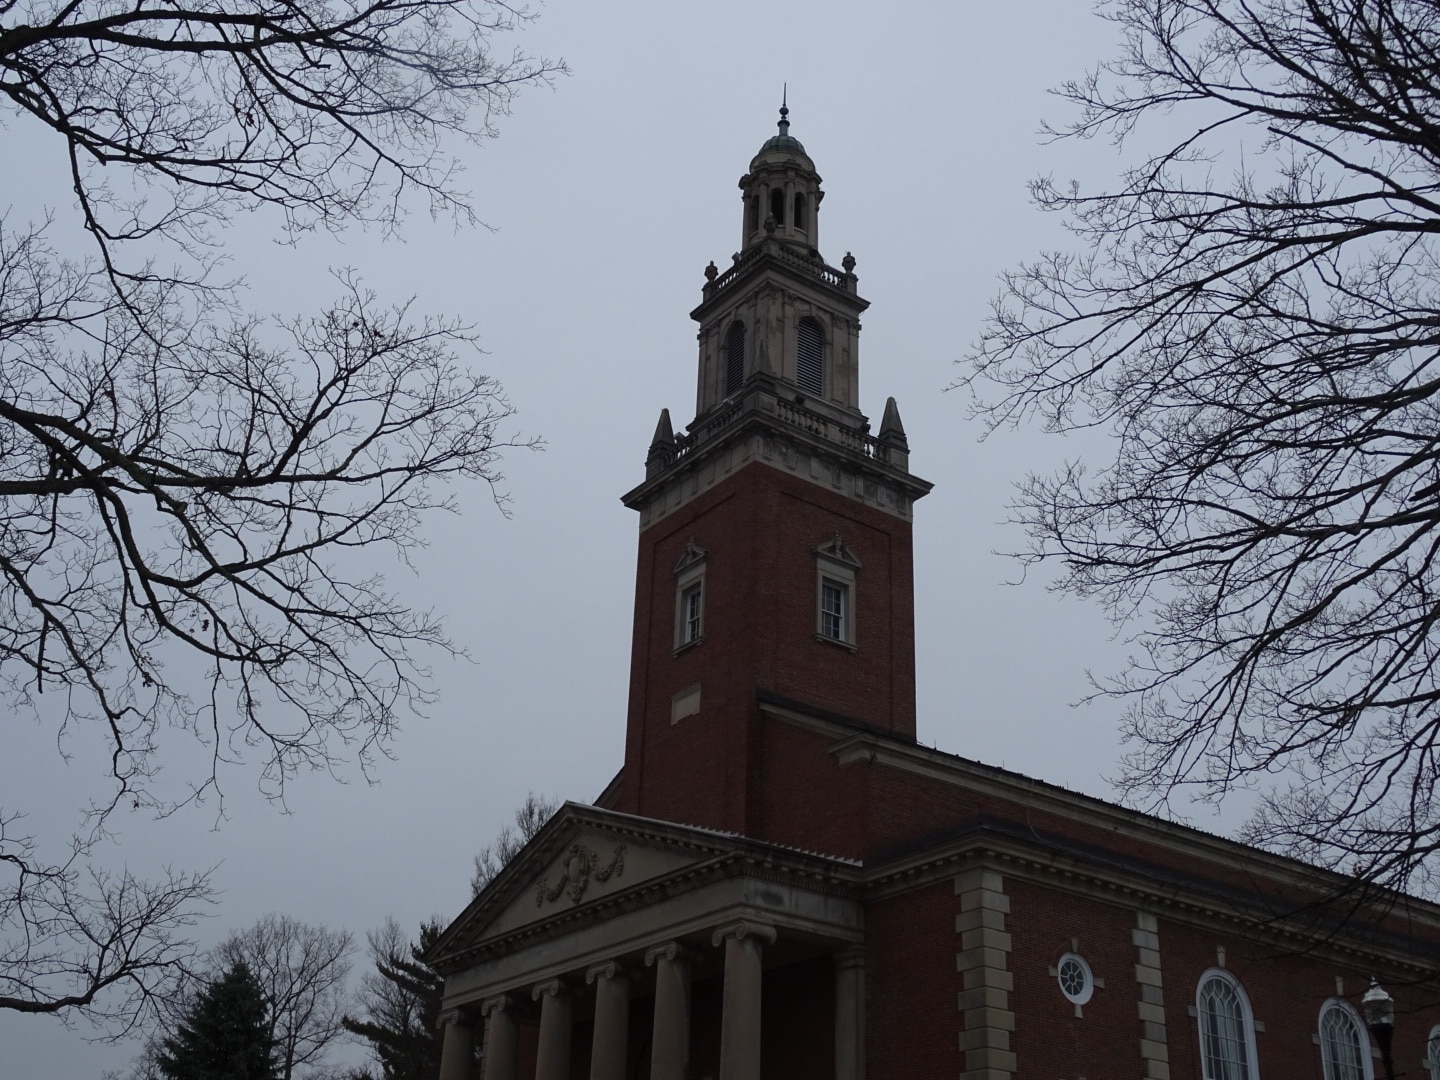 Since its completion in 1924, Swasey Chapel has been Denison’s most iconic structure. The chapel seats 990 and plays host to notable campus events such as baccalaureate services, lectures, concerts, and academic award convocations.